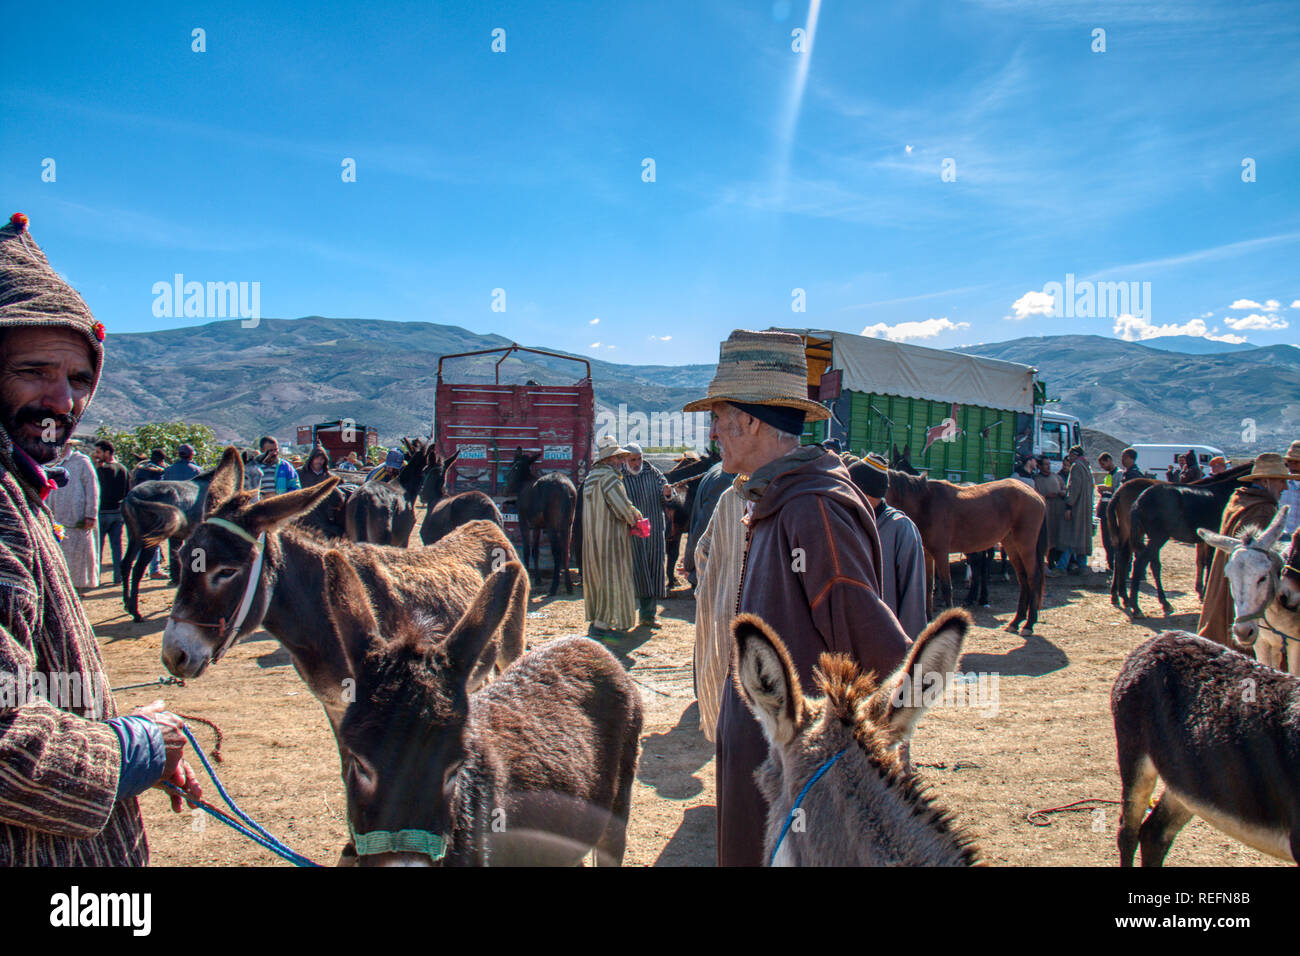 Oued Laou, Chefchaouen, Morocco - November 3, 2018: Vendors and buyers of donkeys gathered in the street market that is installed every Saturday Stock Photo